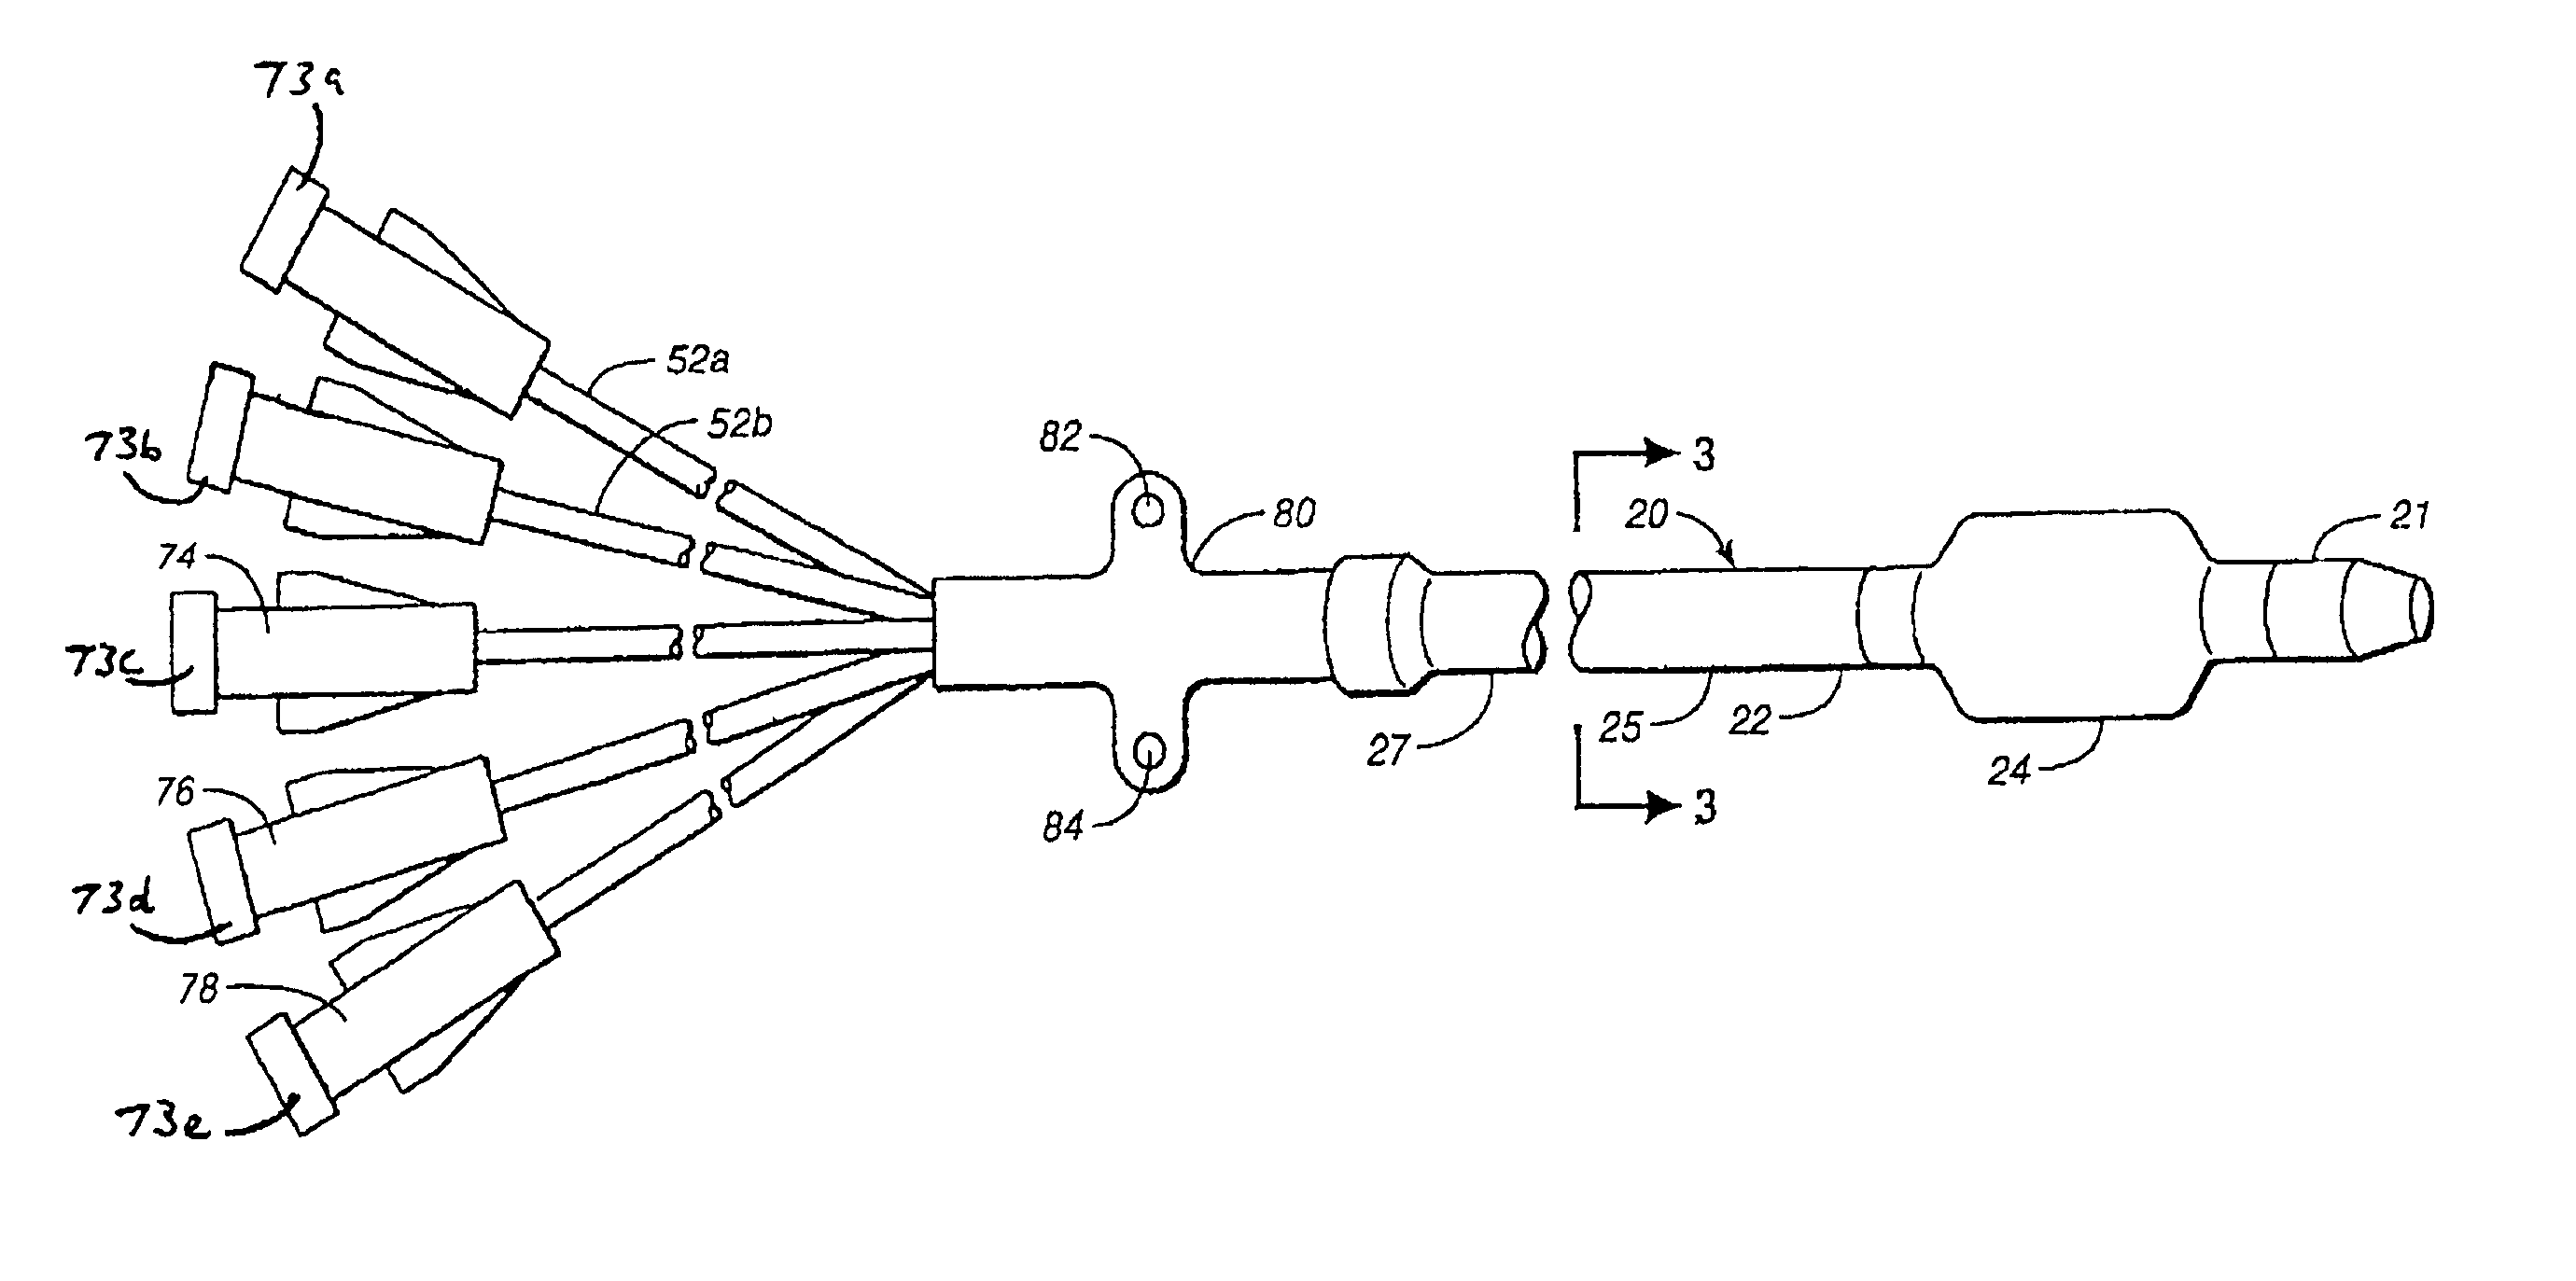 Method for a central venous line catheter having a temperature control system